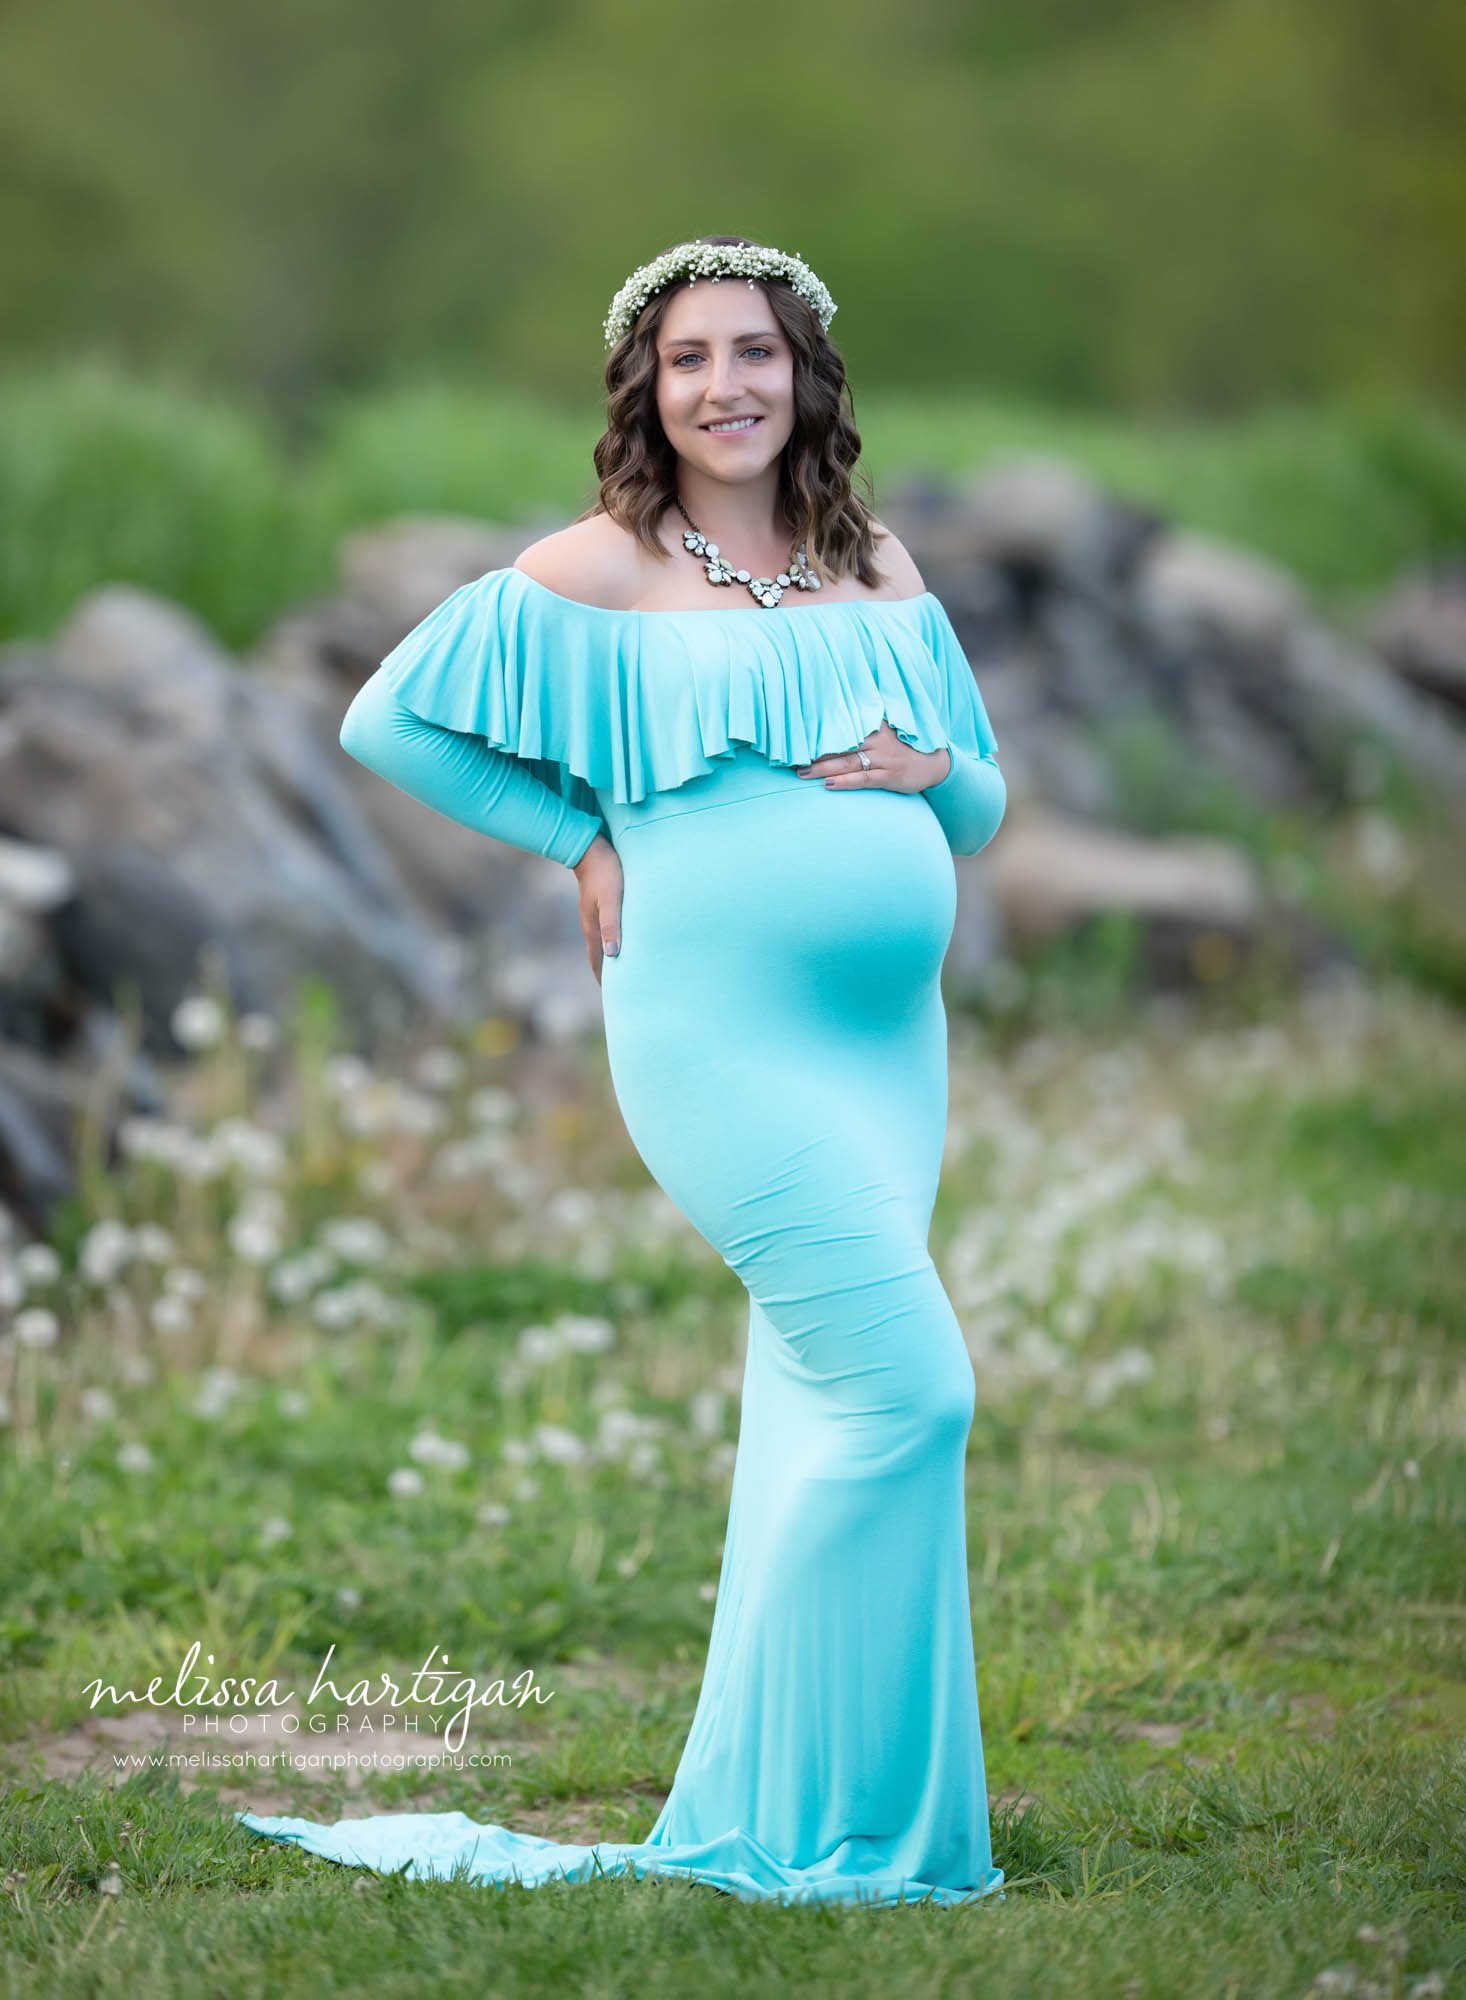 mom holding baby bump wearing bright blue long form fitted maternity gown with ruffles neck line Massachusetts maternity photography